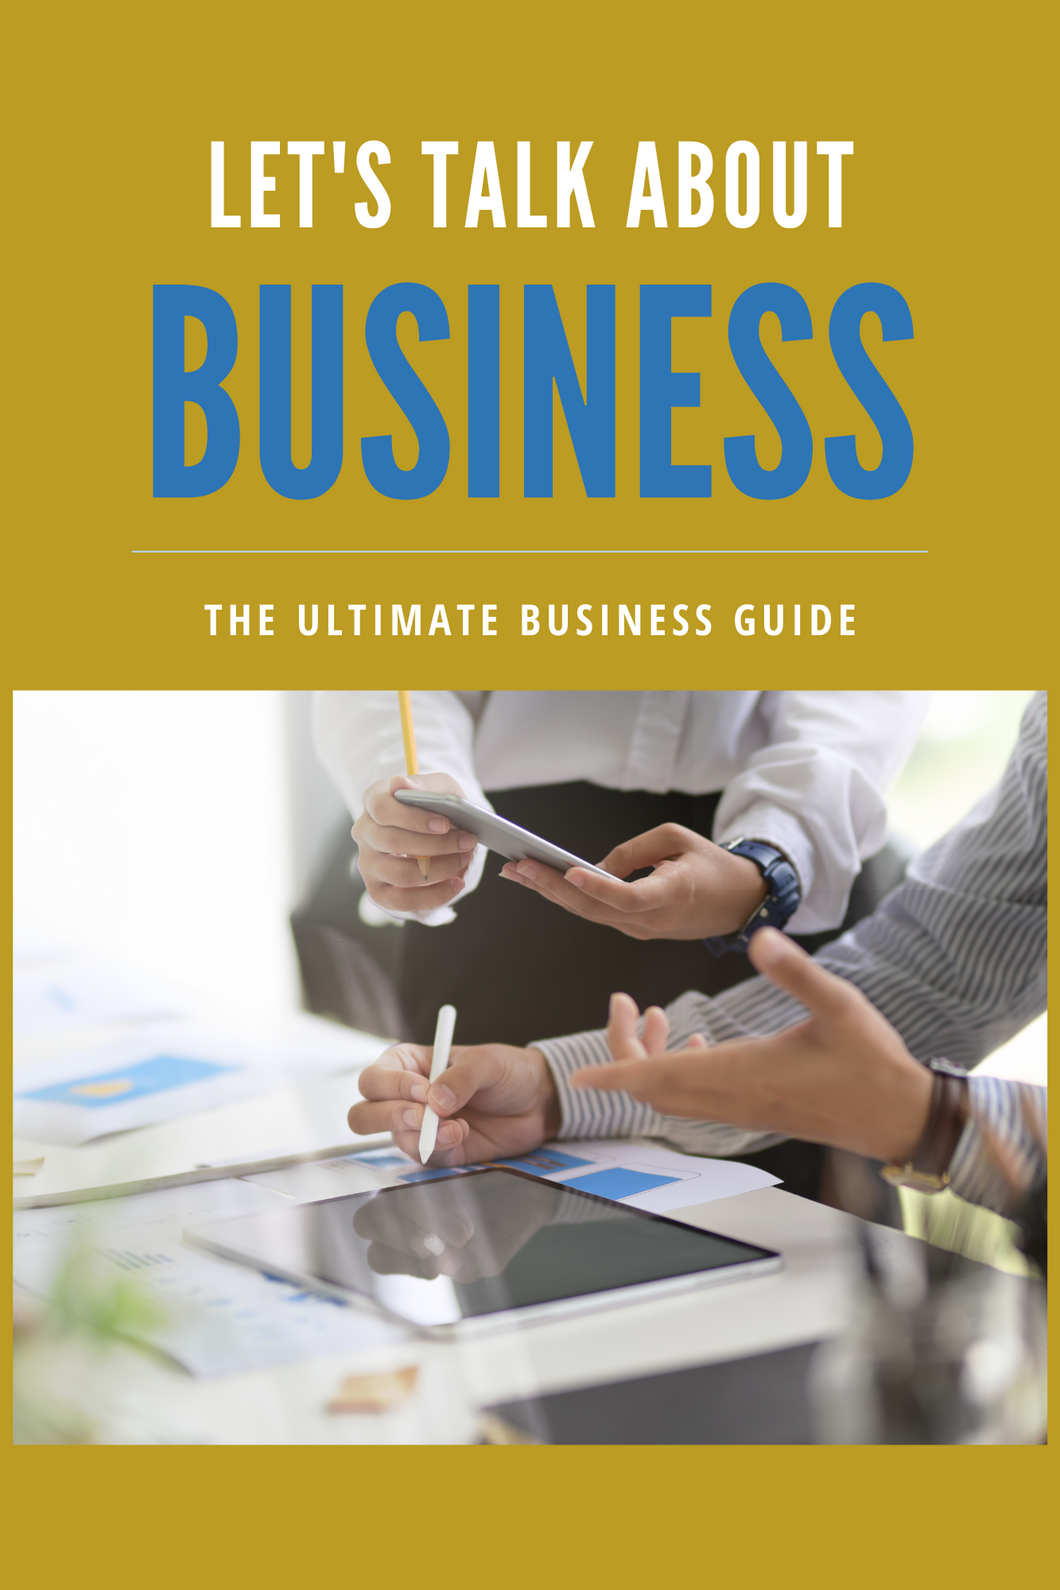 The Ultimate Guide to Business